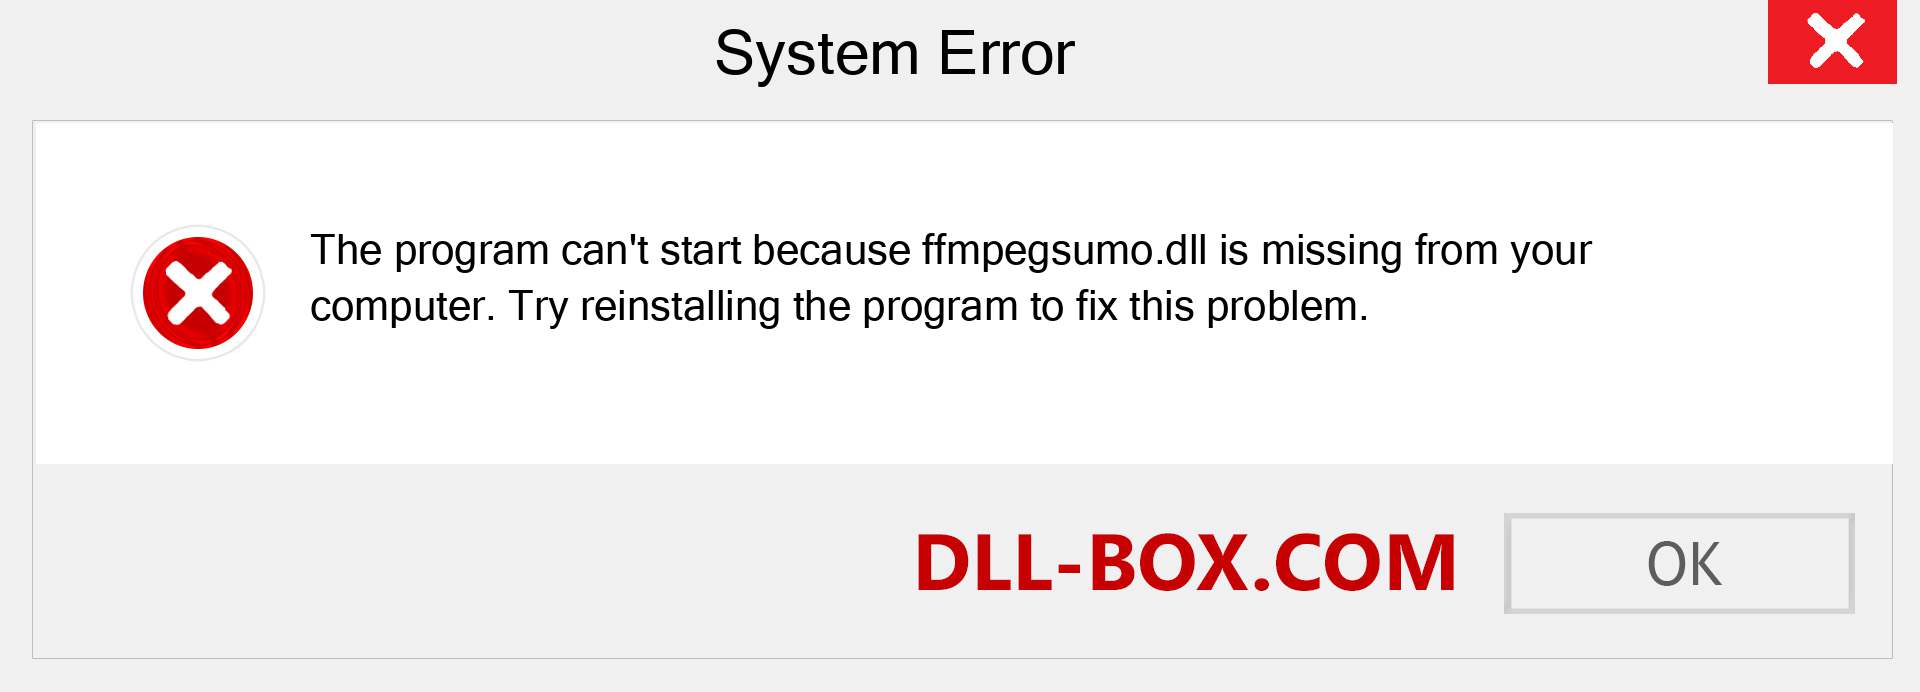  ffmpegsumo.dll file is missing?. Download for Windows 7, 8, 10 - Fix  ffmpegsumo dll Missing Error on Windows, photos, images